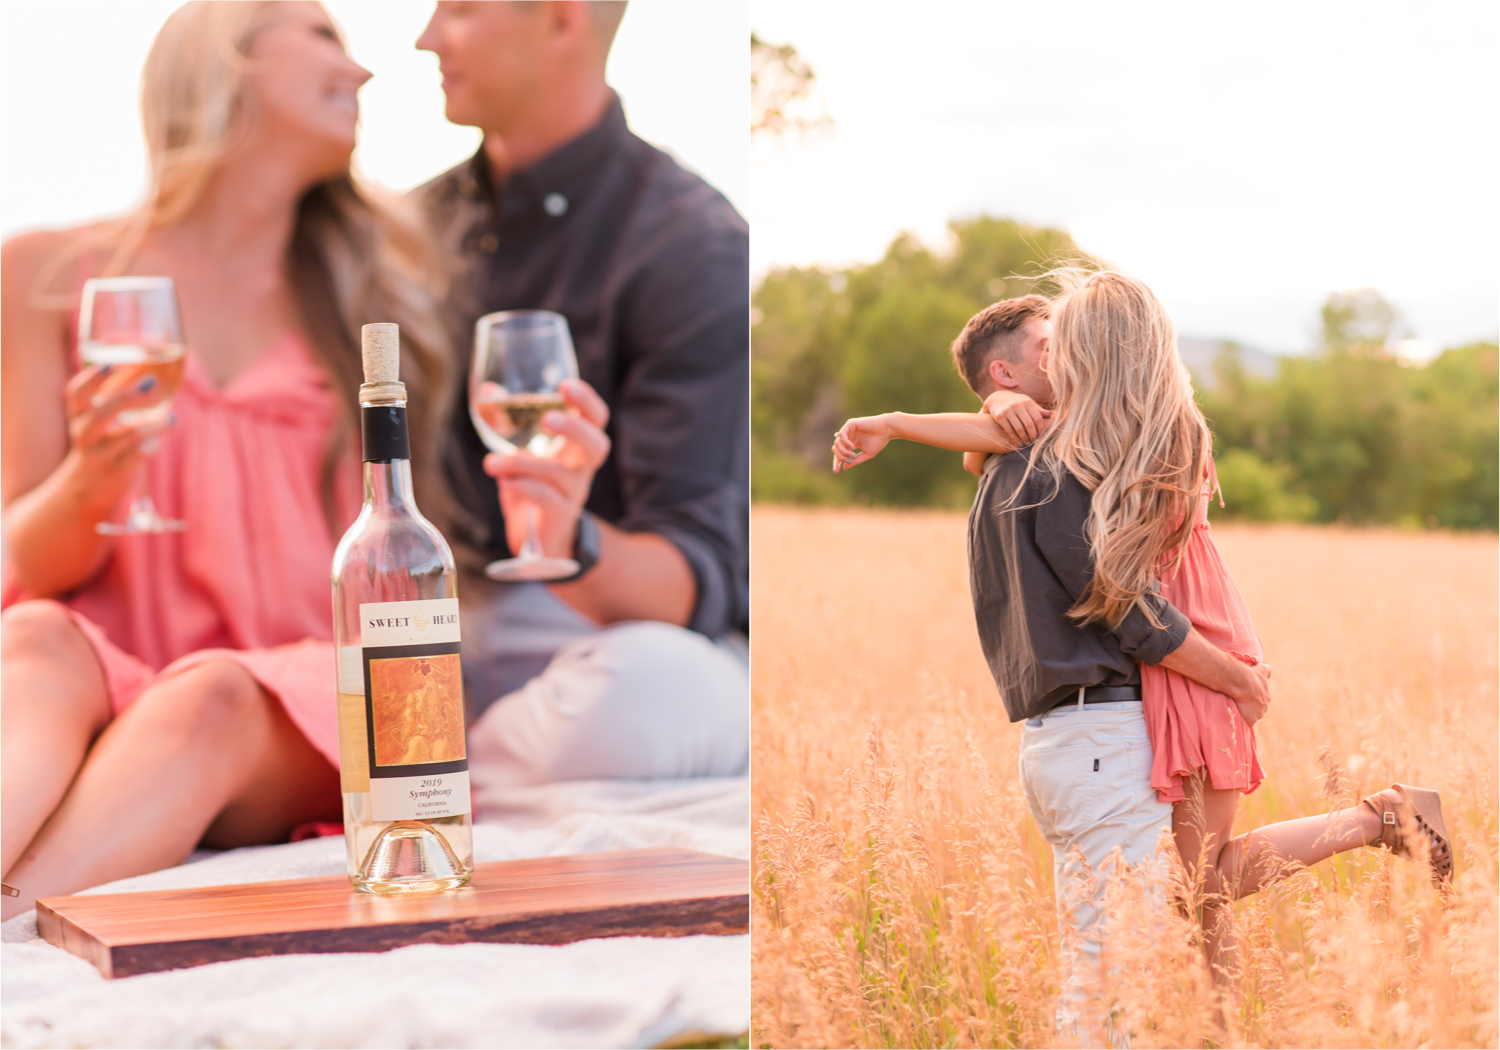 Romantic Winery engagement at Sweet Heart Winery in Loveland  | Britni Girard Photography, Colorado Wedding Photographer | Strolls along the Big Thompson River at Sunset, toasting their engagement with Sweet Heart Wine and dancing in the field during sunset